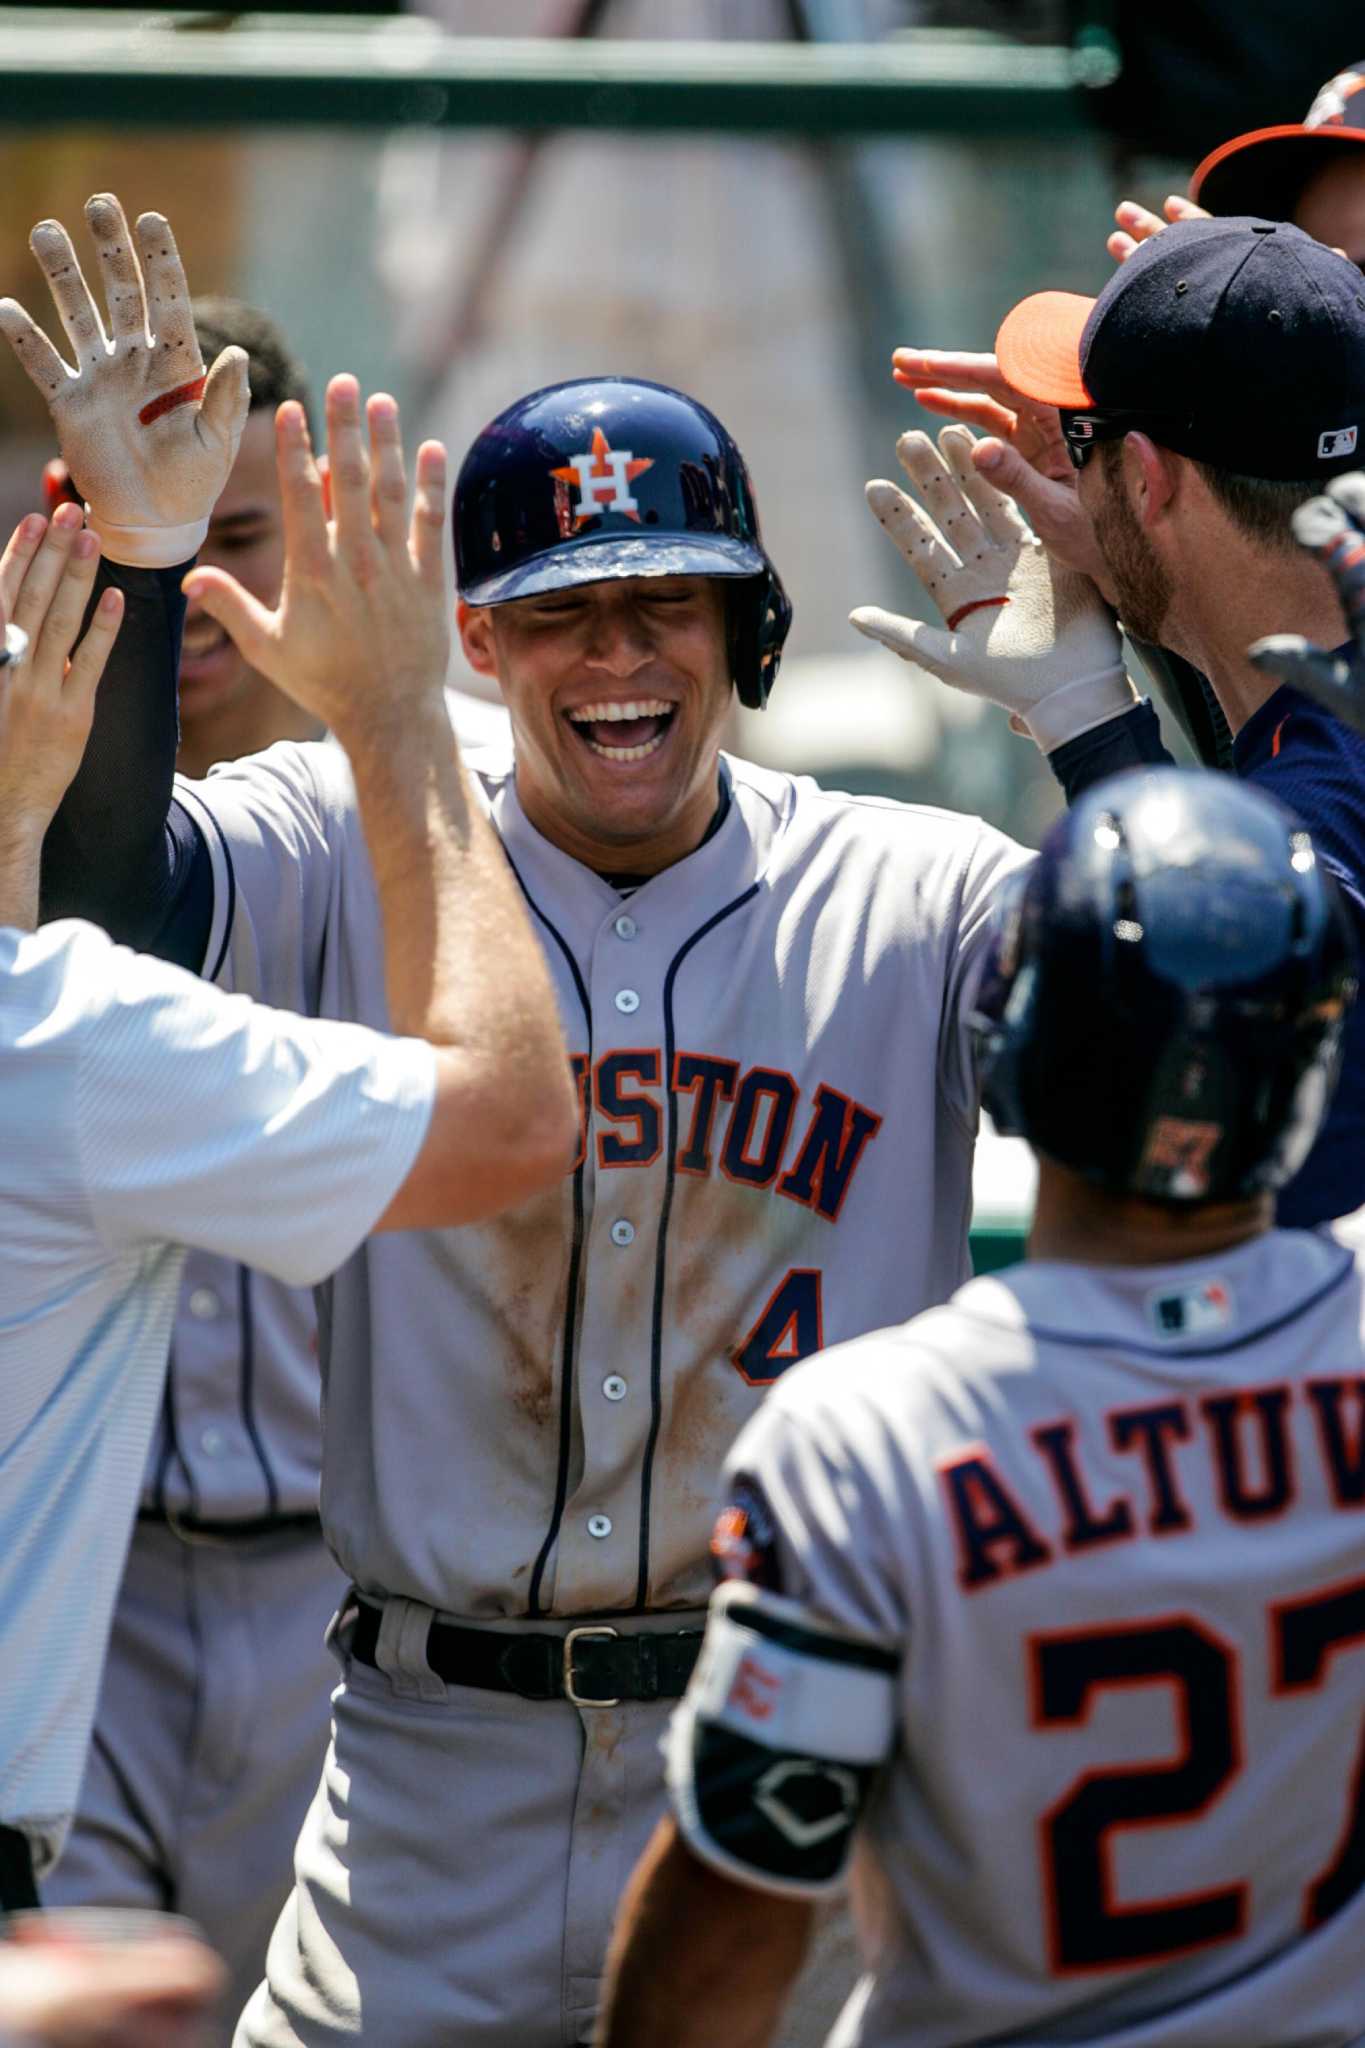 Houston Astros: George Springer slams his way into the history books